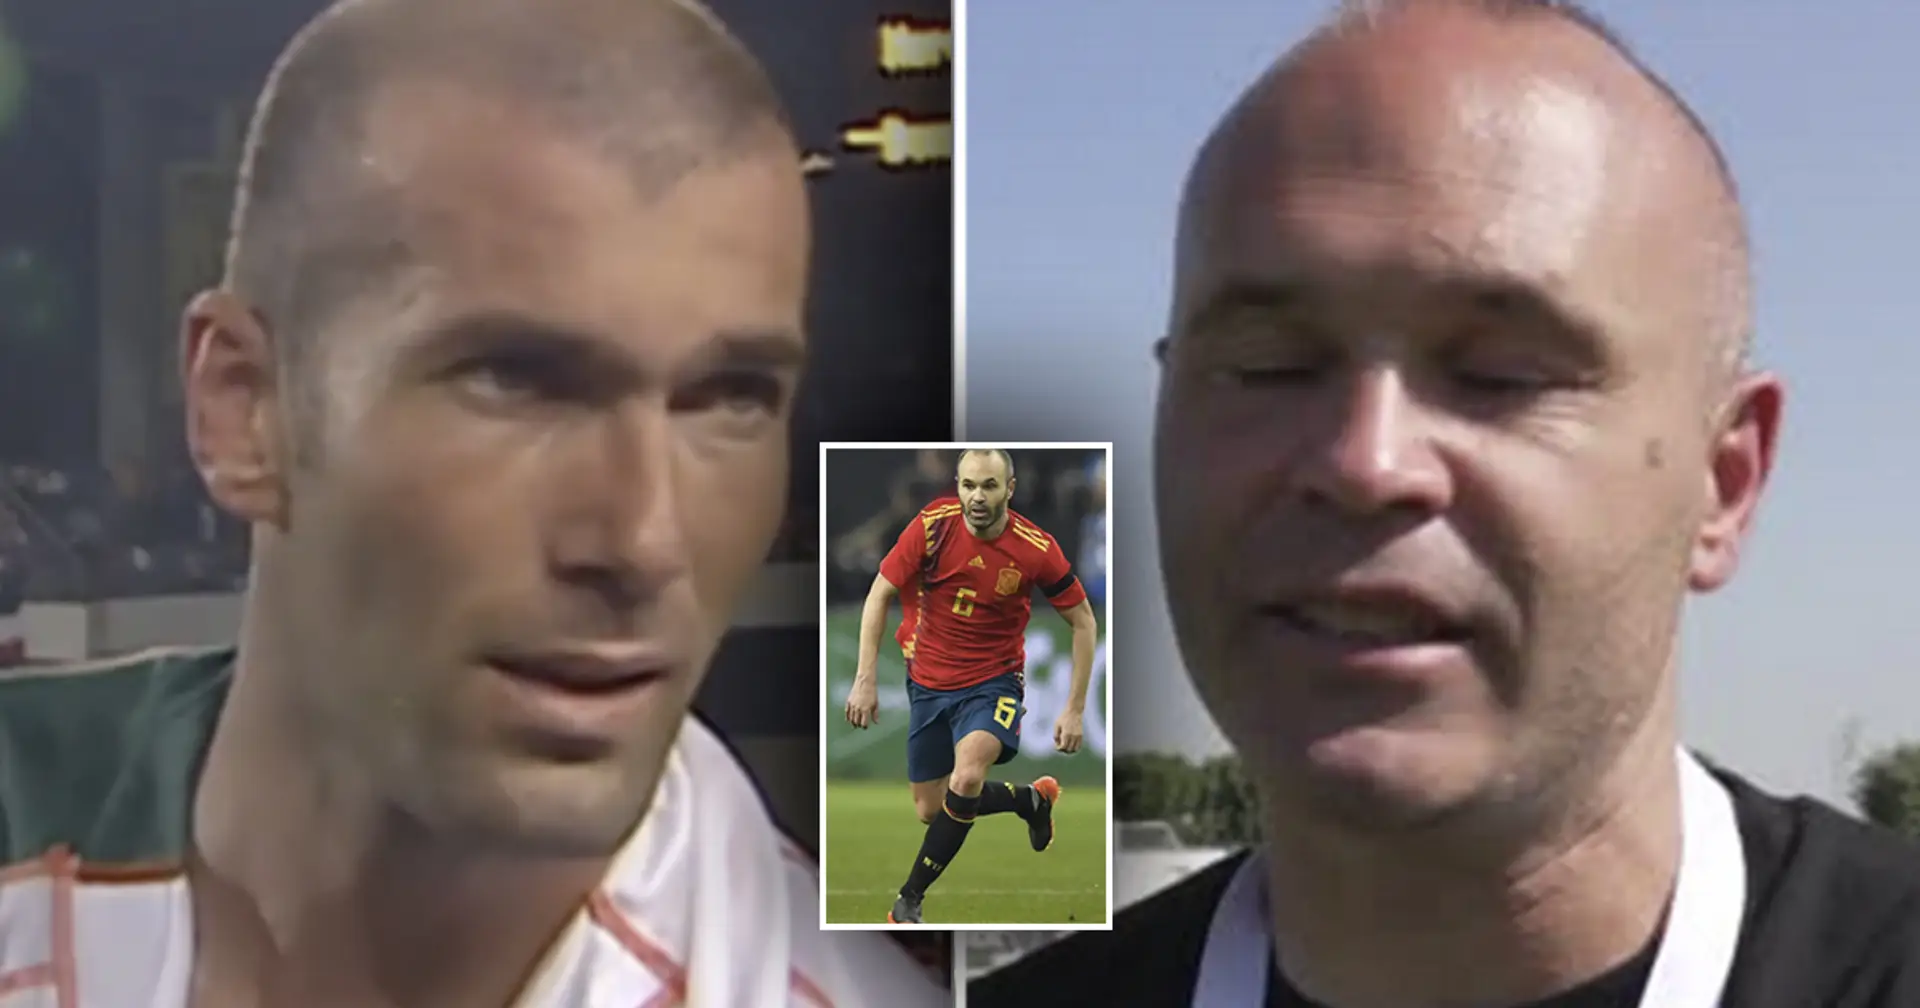 Iniesta gets told he is better than Zidane, his 3-word response is classy